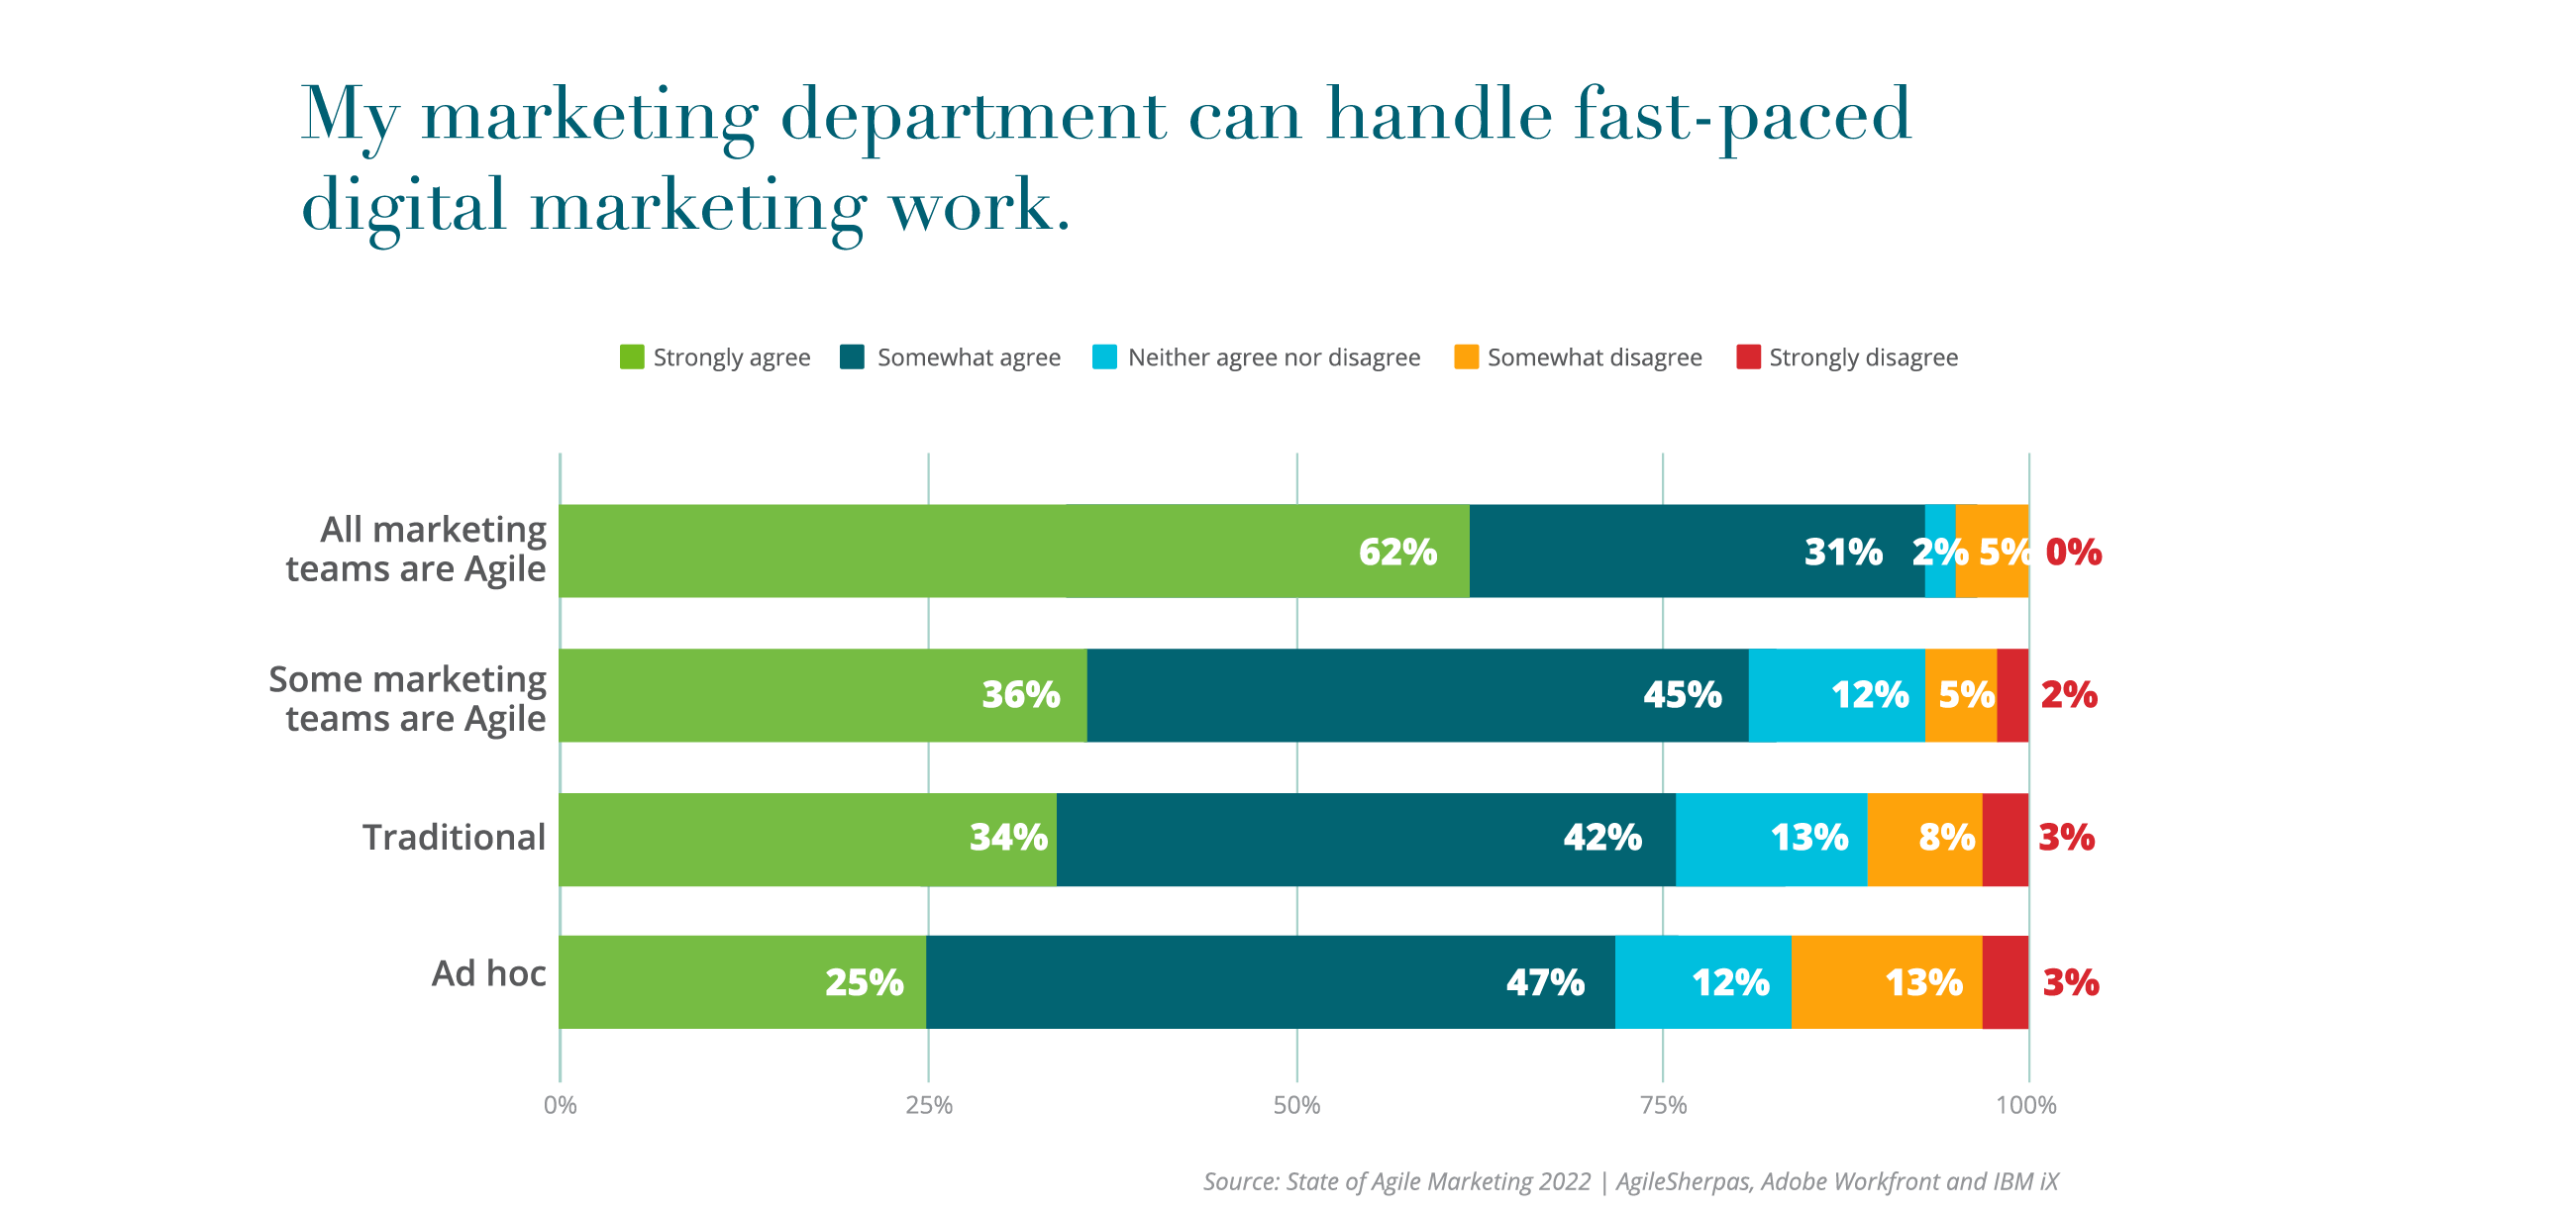 5th-Agile_Report-Charts-_4. My marketing department can handle fast-paced digital marketing work